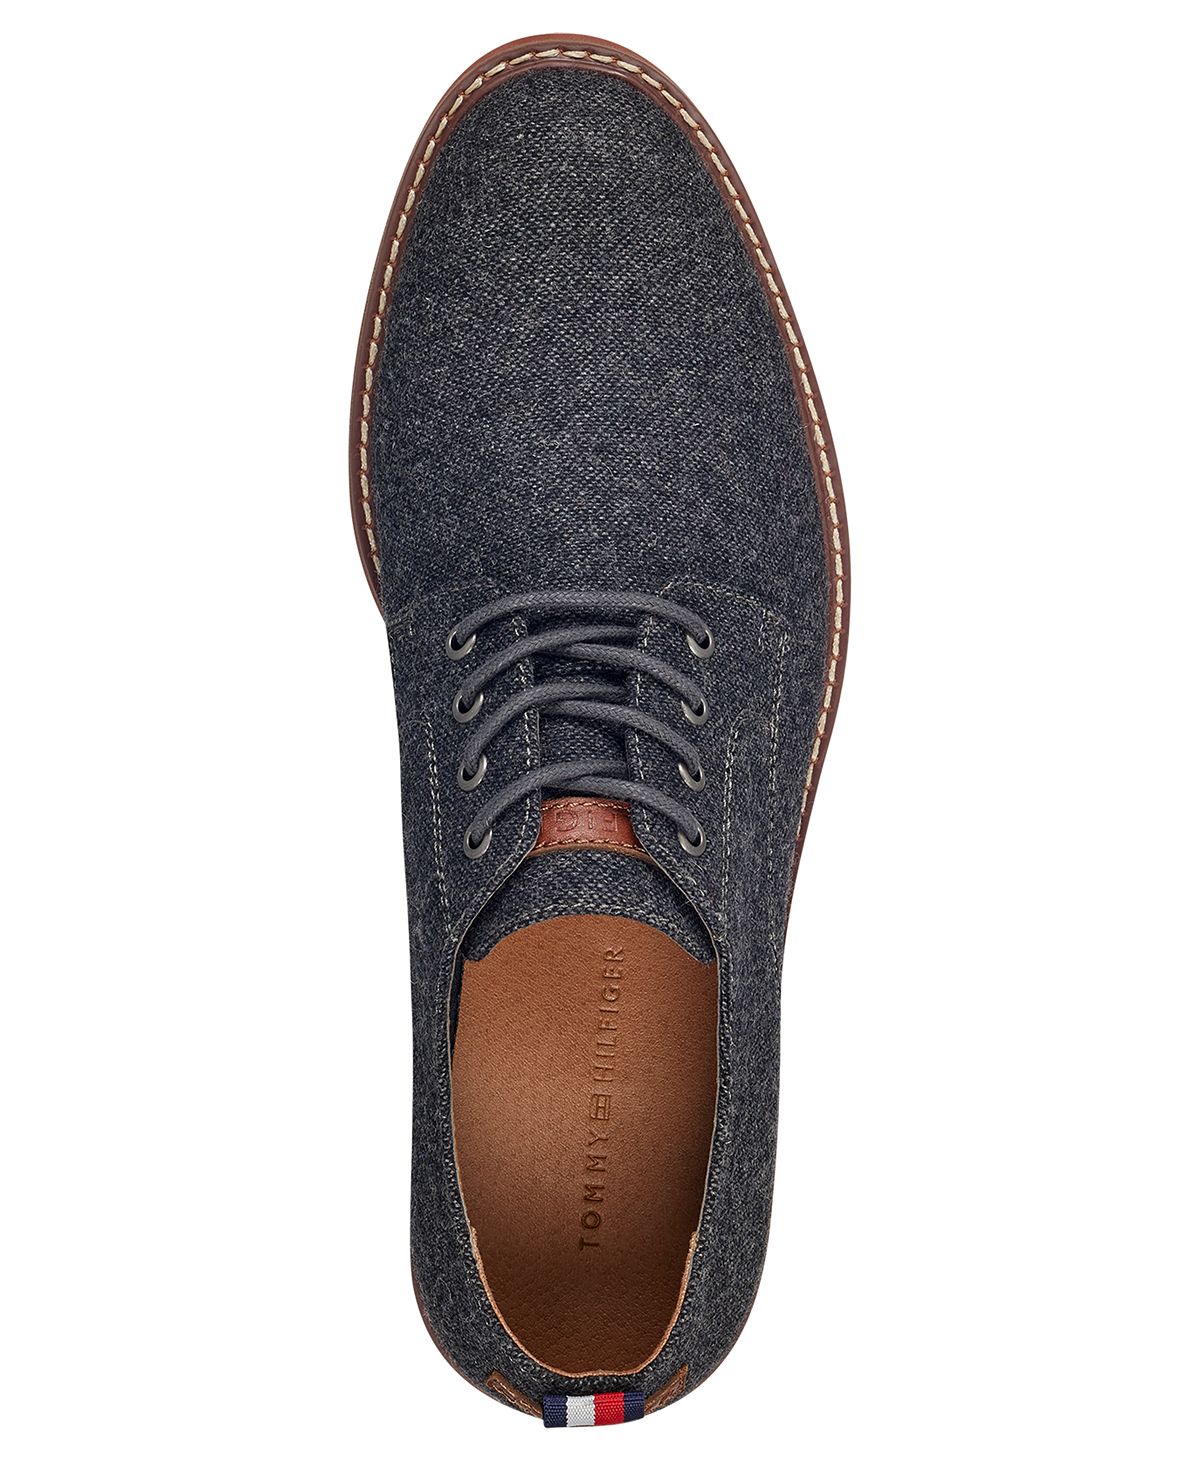 Tommy Hilfiger Garson Lace-up Casual Oxfords Charcoal